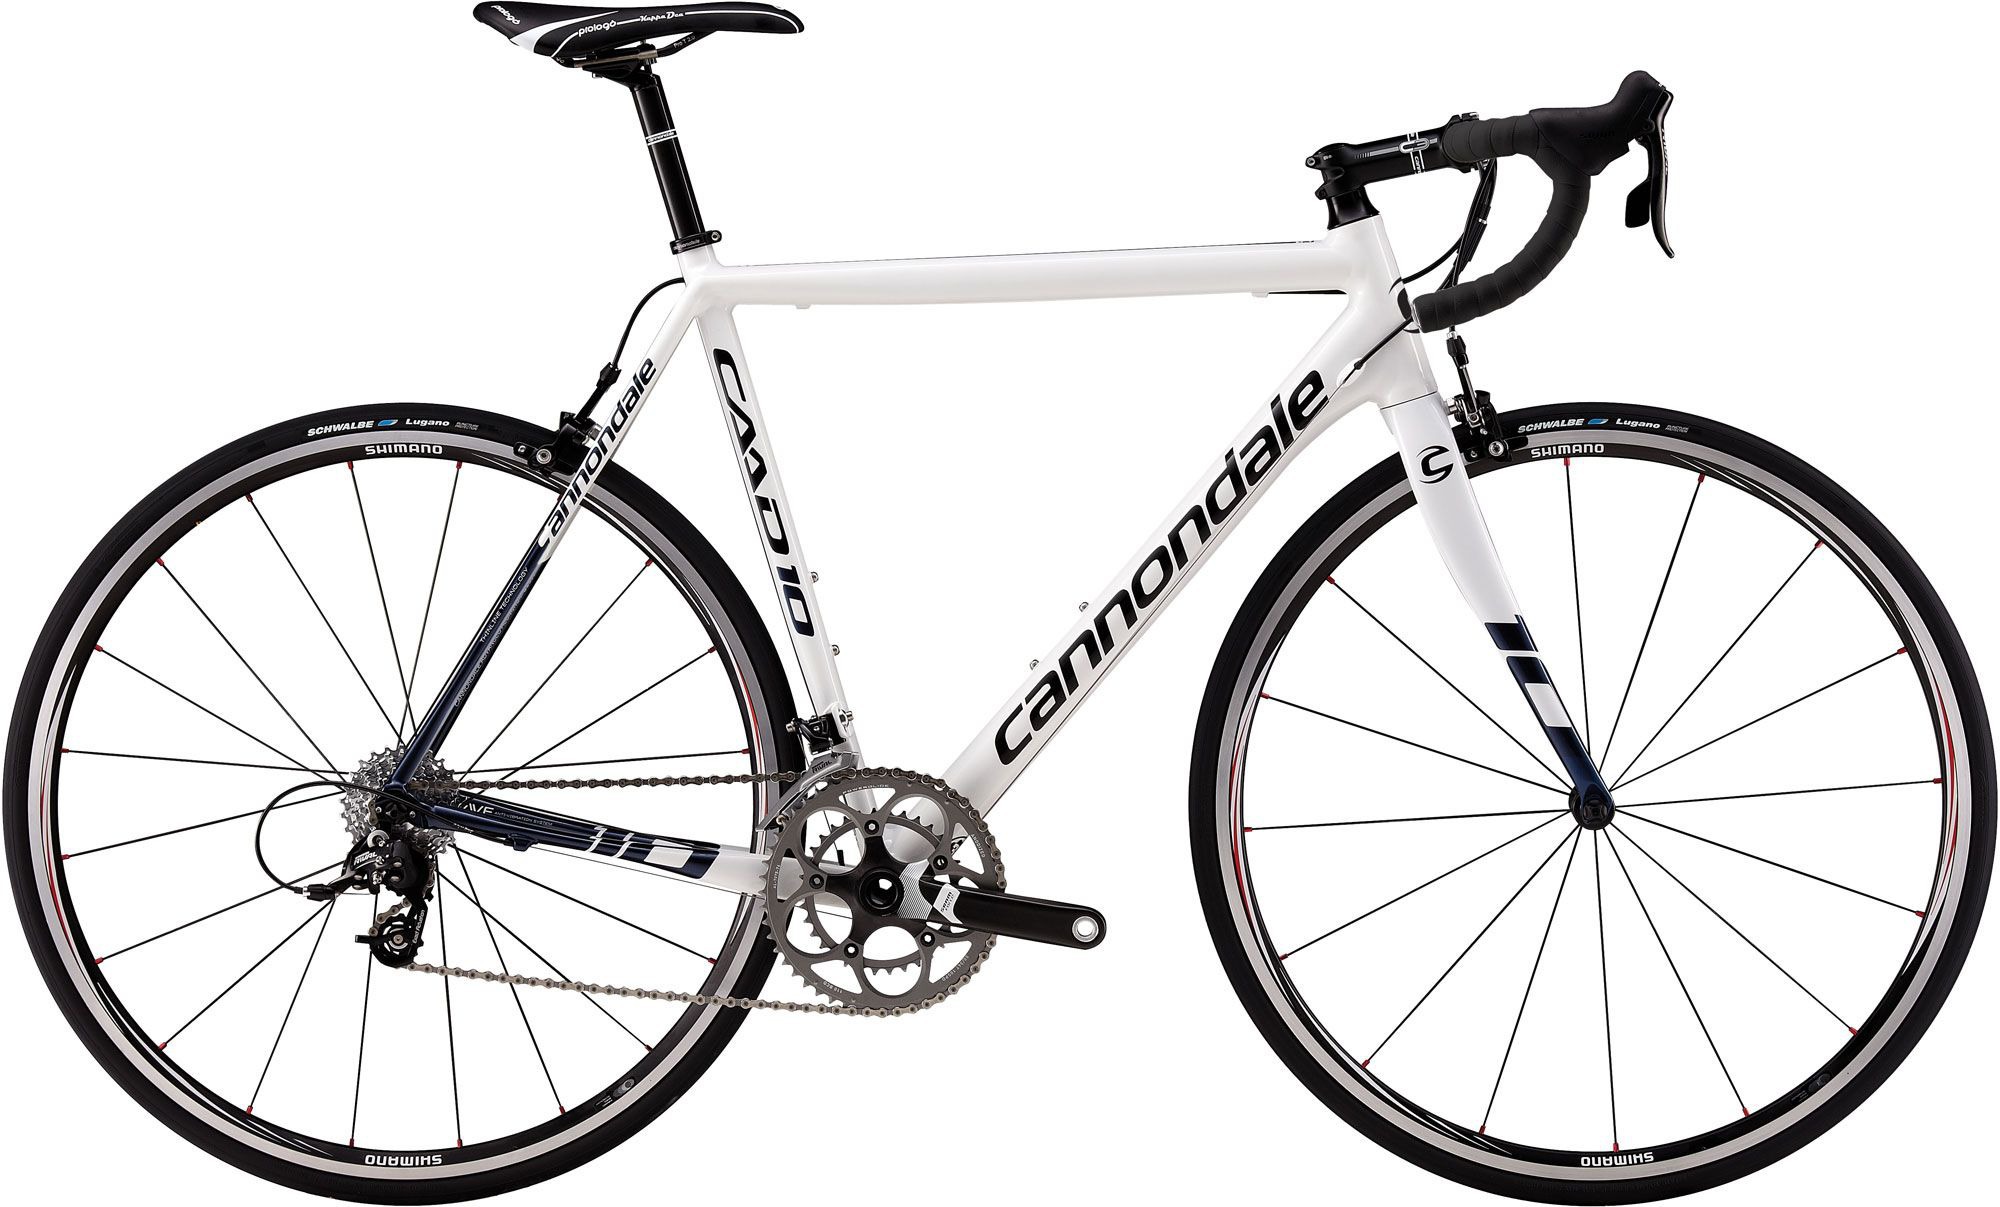 2011 Cannondale CAAD10 4 - Bicycle 